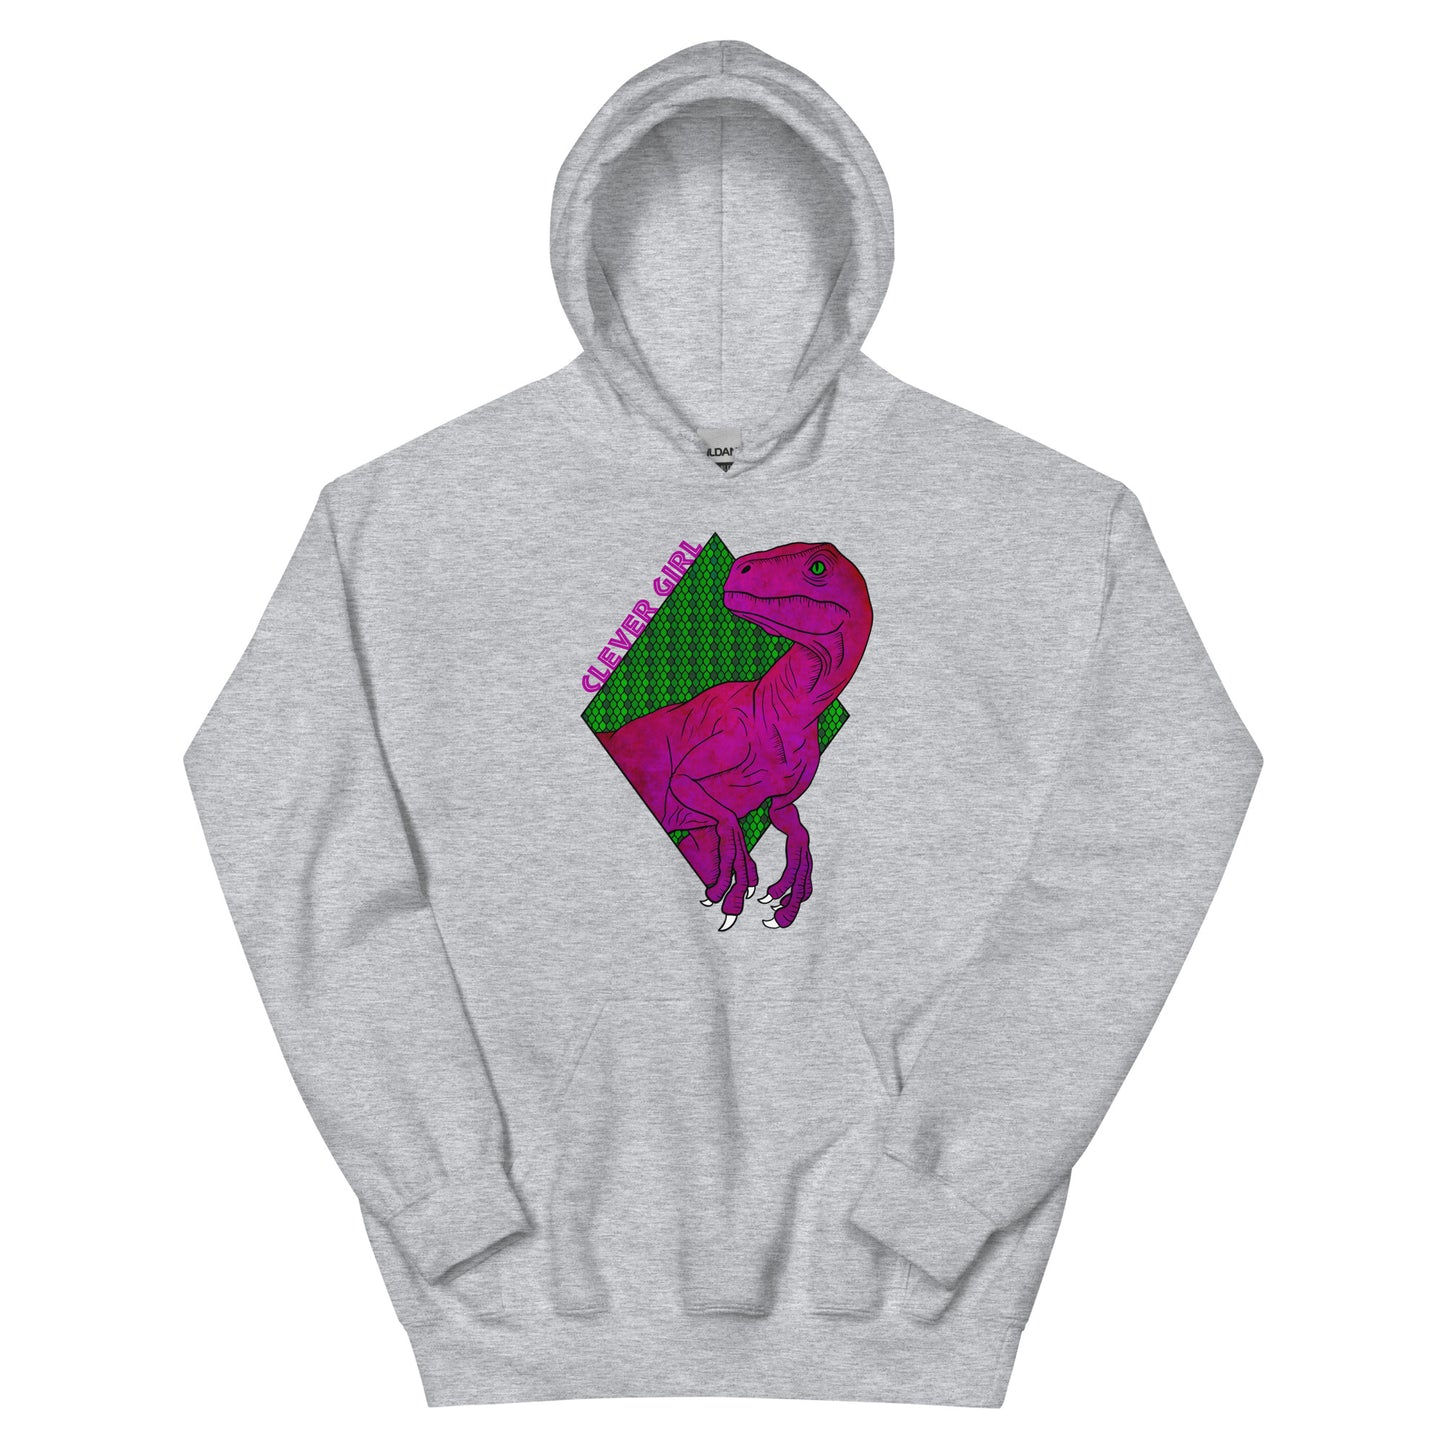 Pink Clever Girl Unisex Hoodie